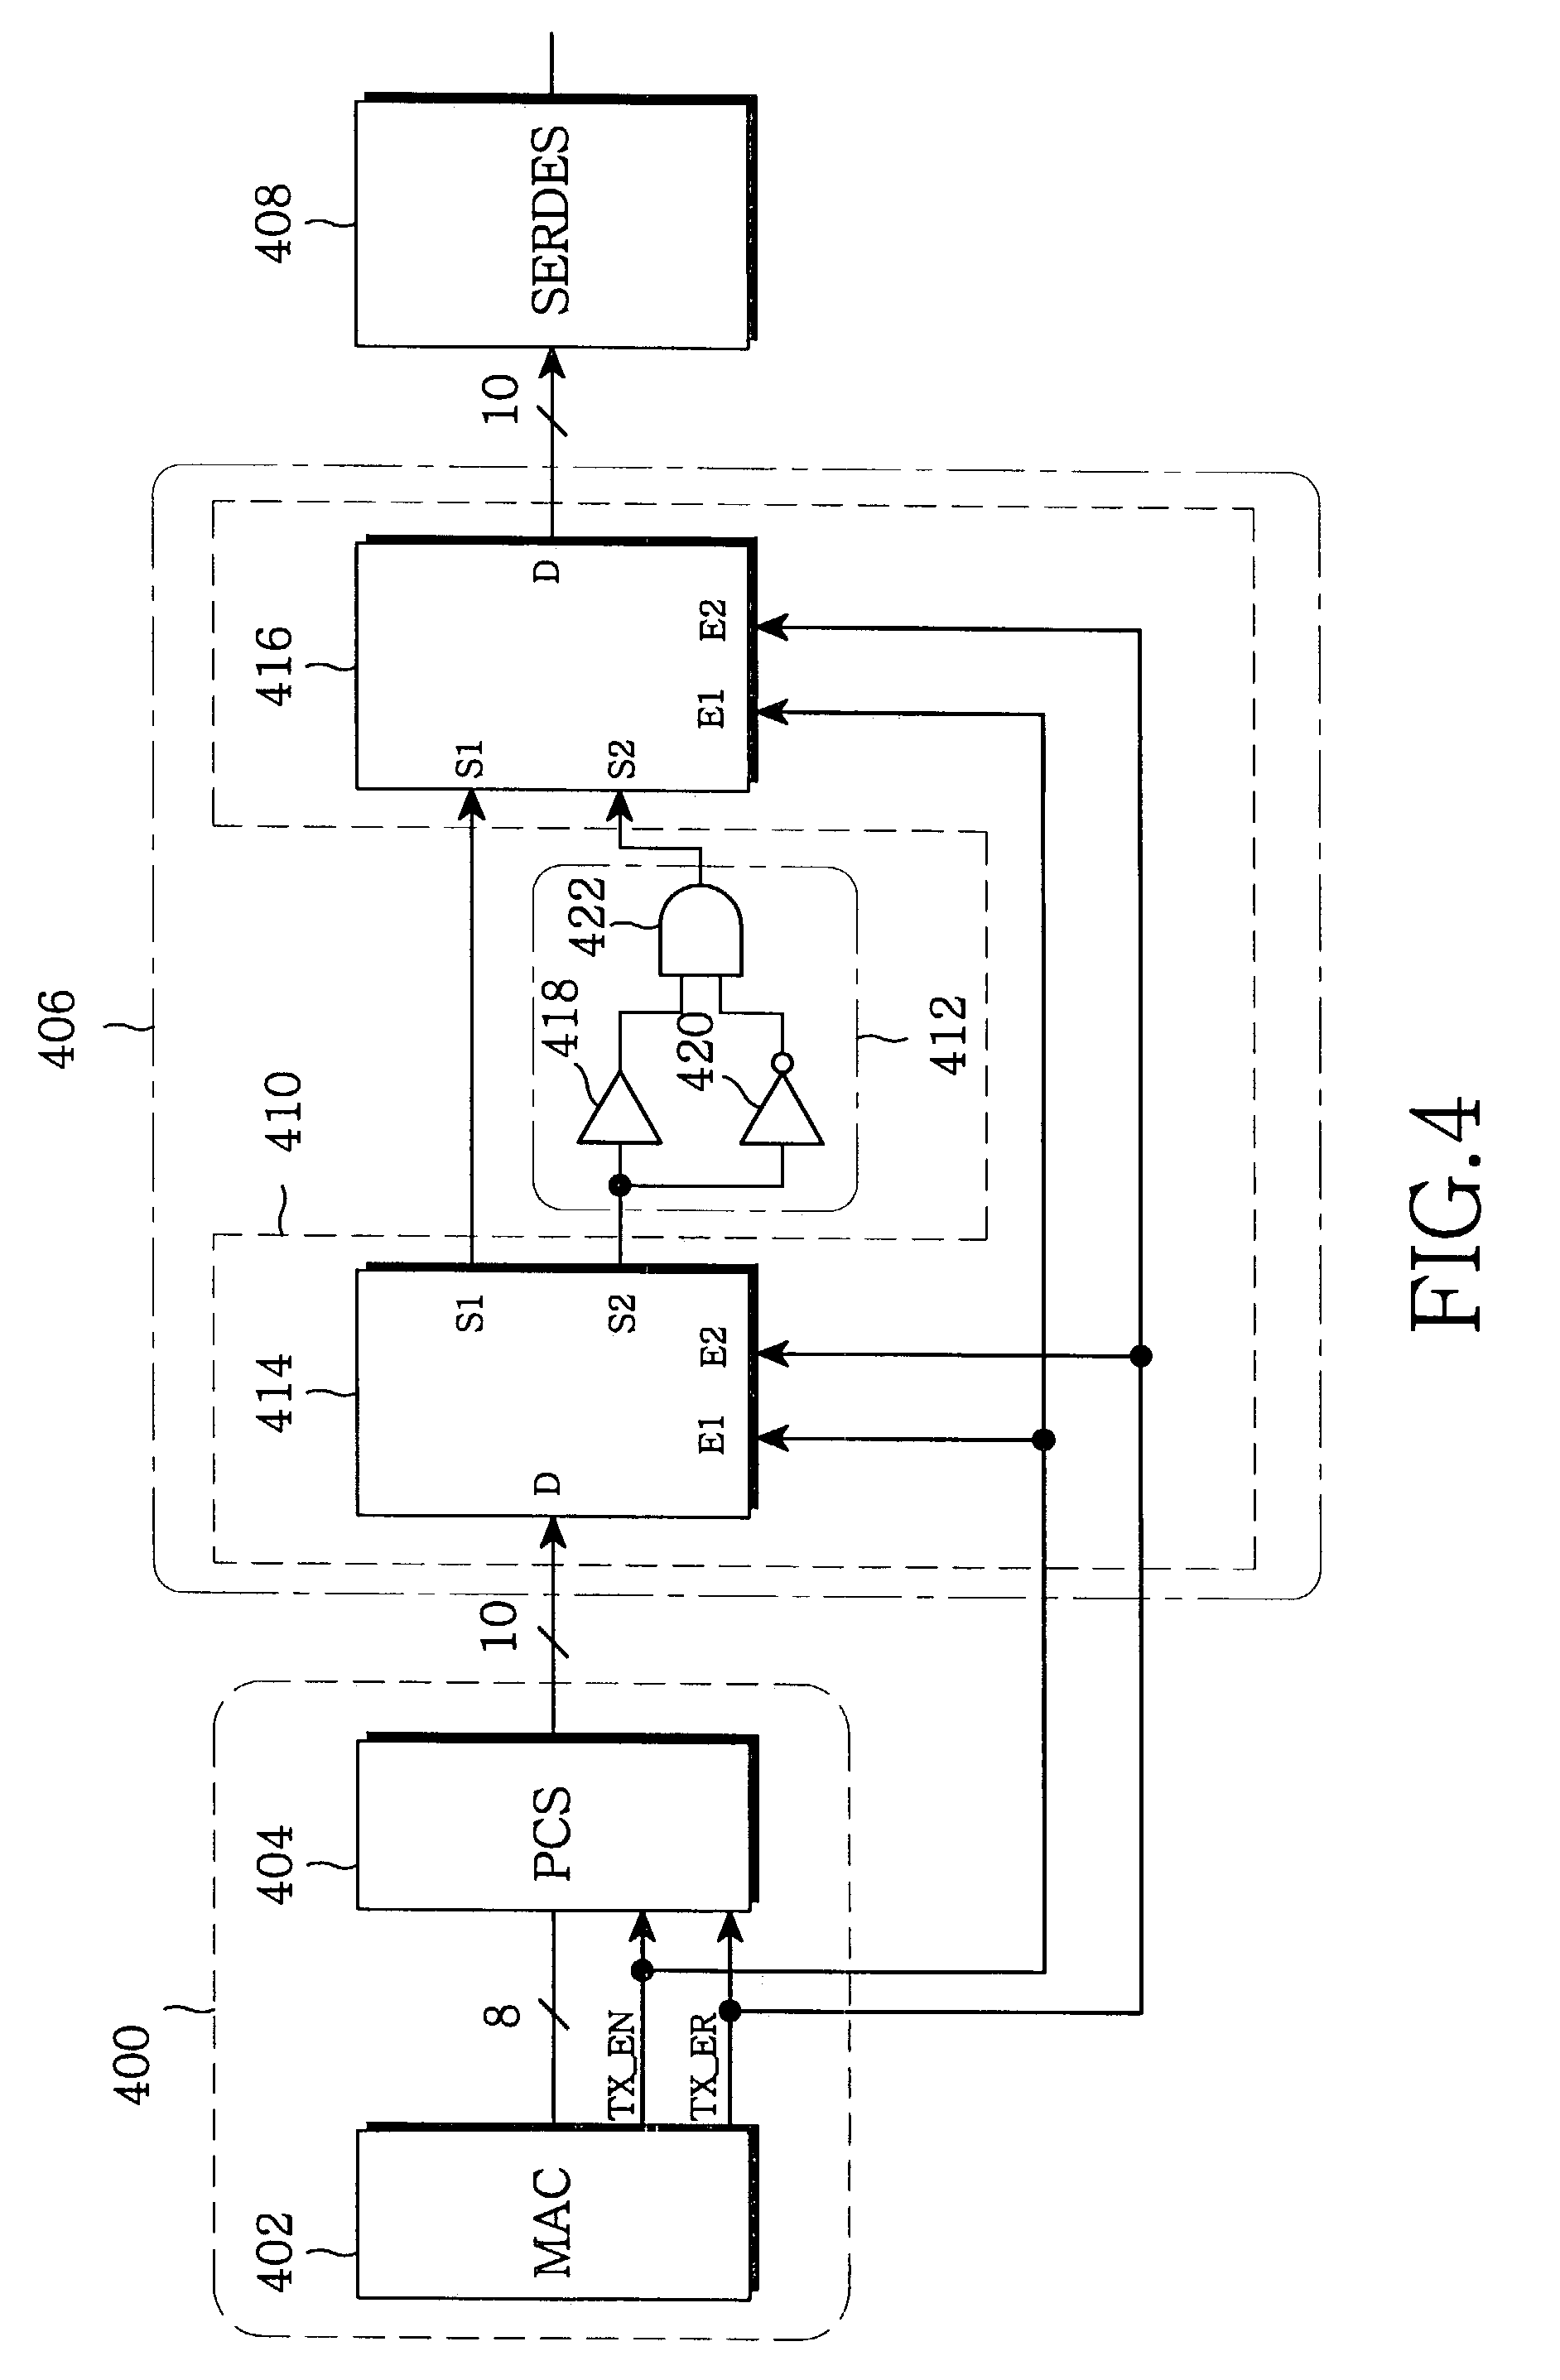 Idle-pattern output control circuit used in a Gigabit Ethernet-passive optical network